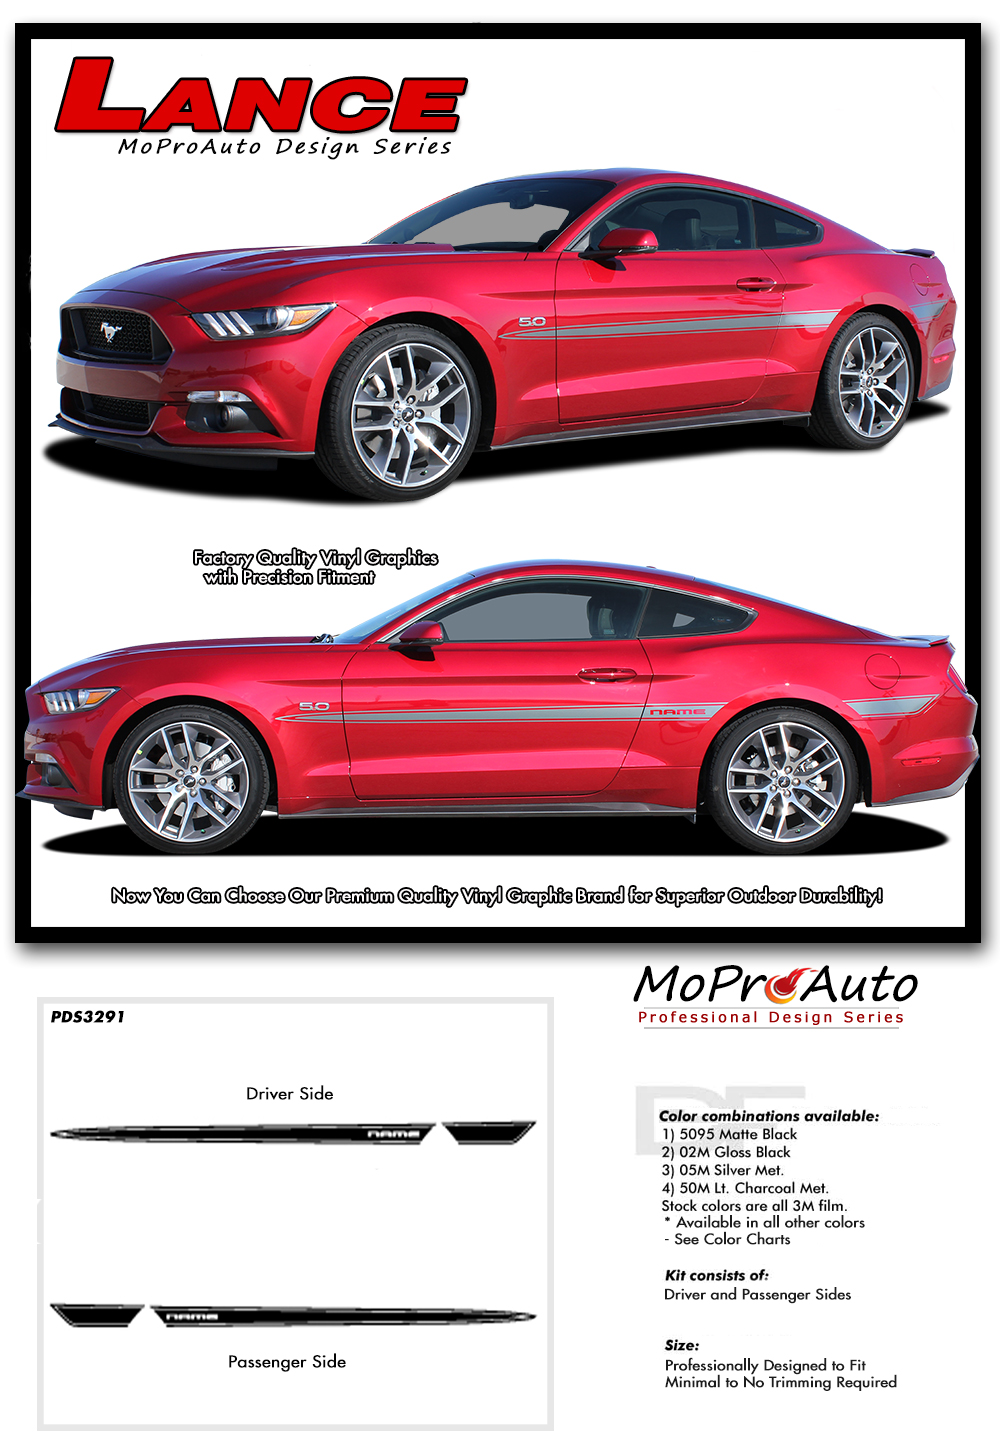 2015 2016 2017 2018 2019 2020 2021 2022 2023 LANCE Ford Mustang - MoProAuto Pro Design Series Vinyl Graphics and Decals Kit